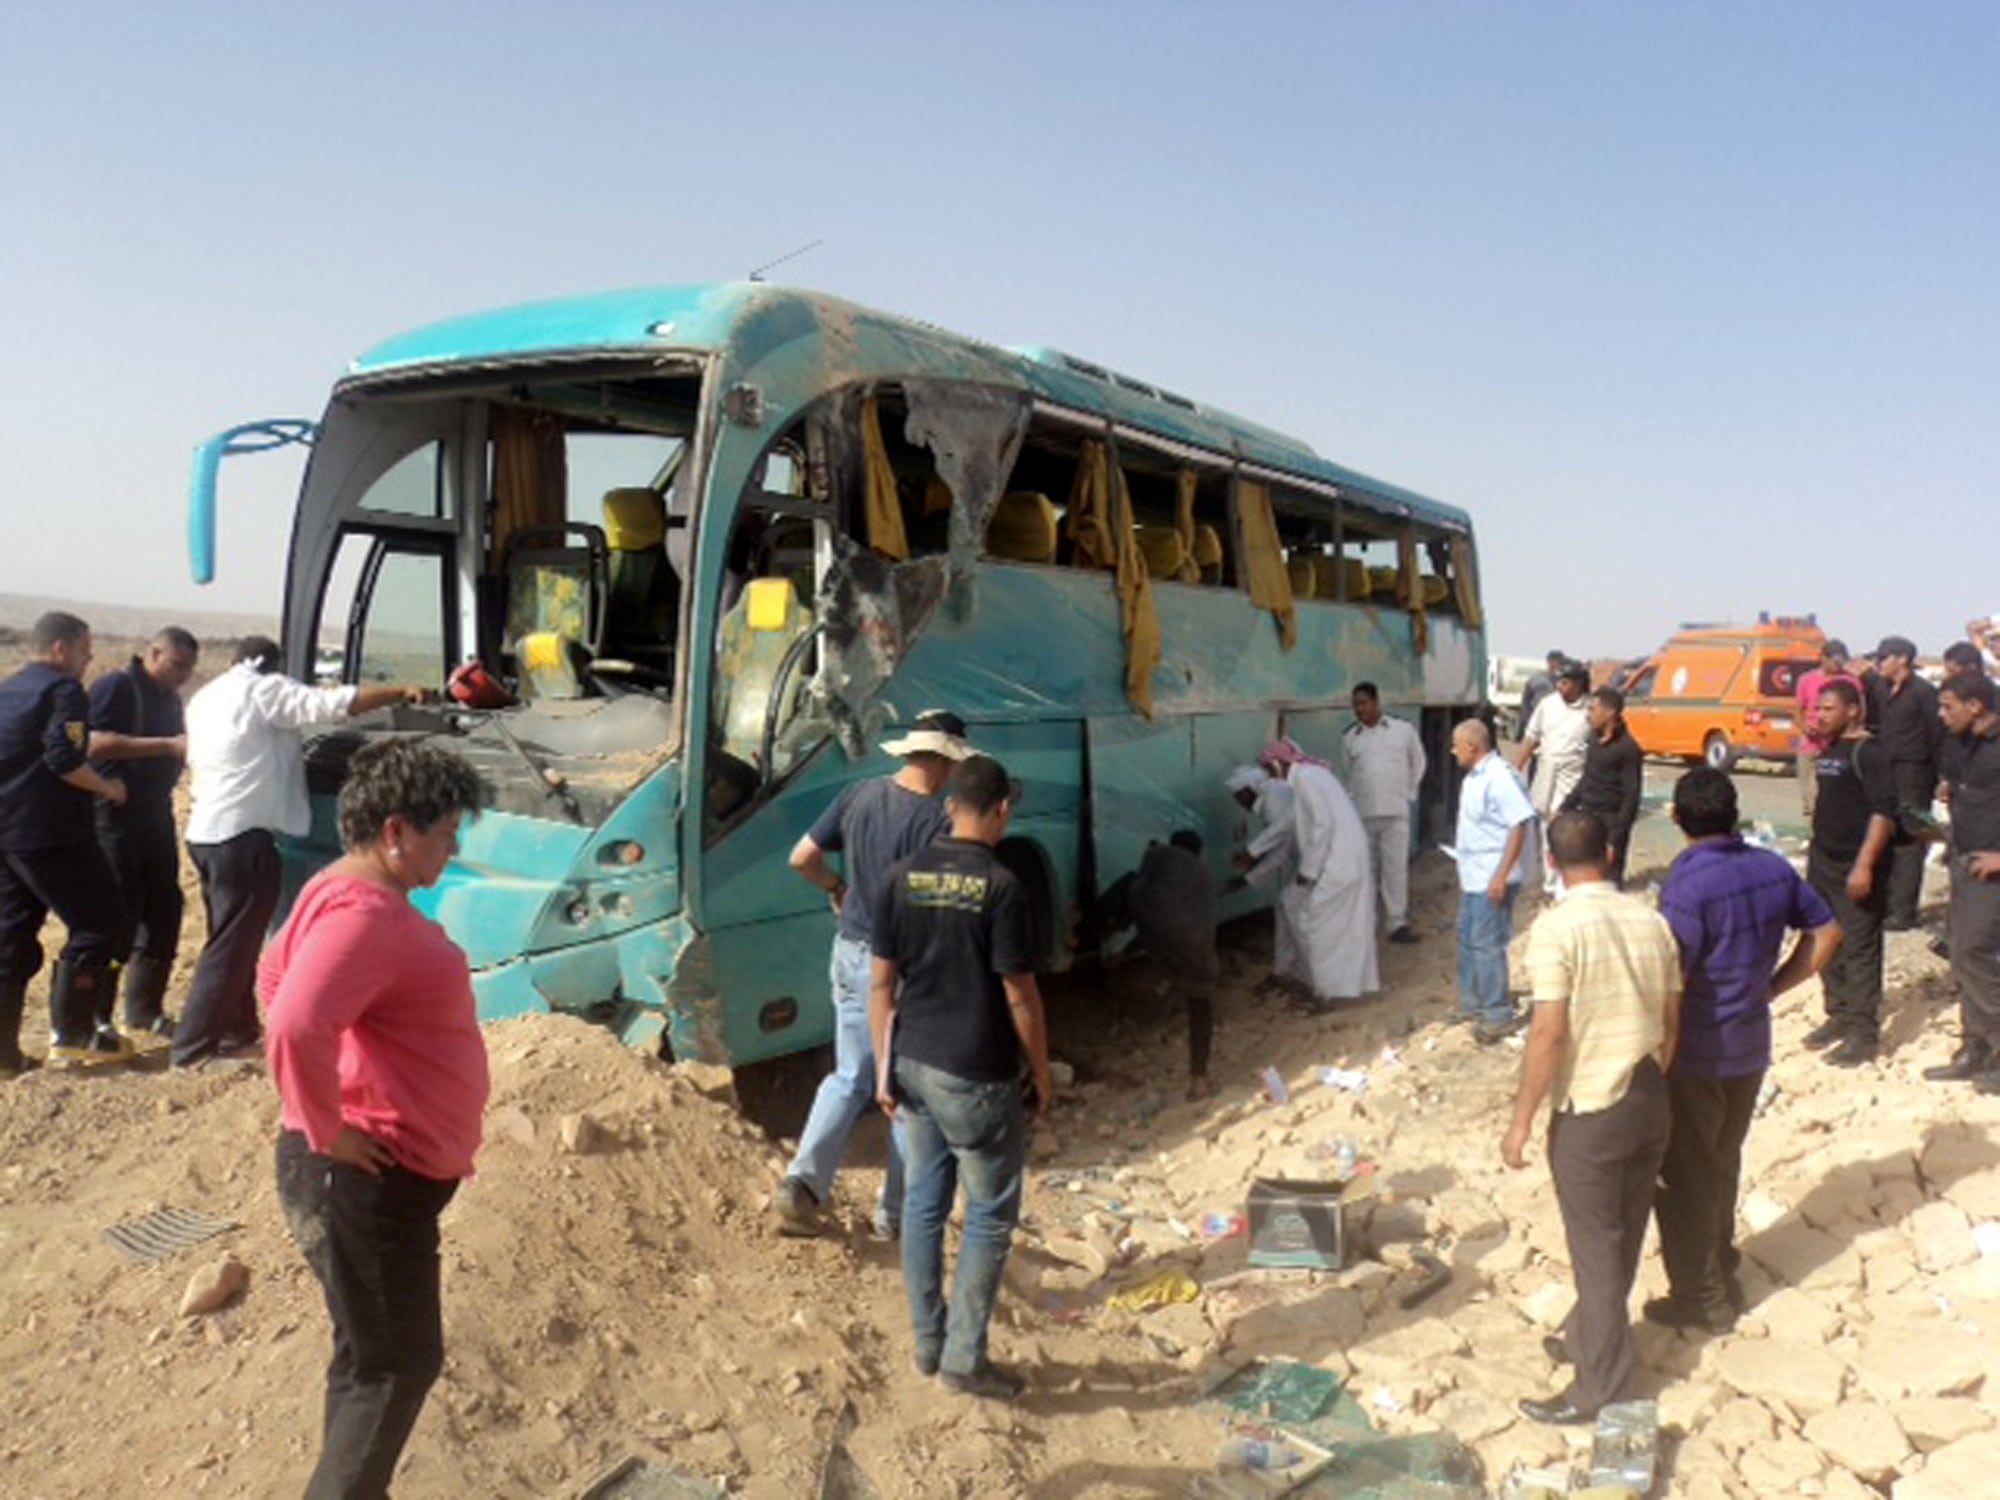 6 Mexican tourists killed in Egypt bus accident. 